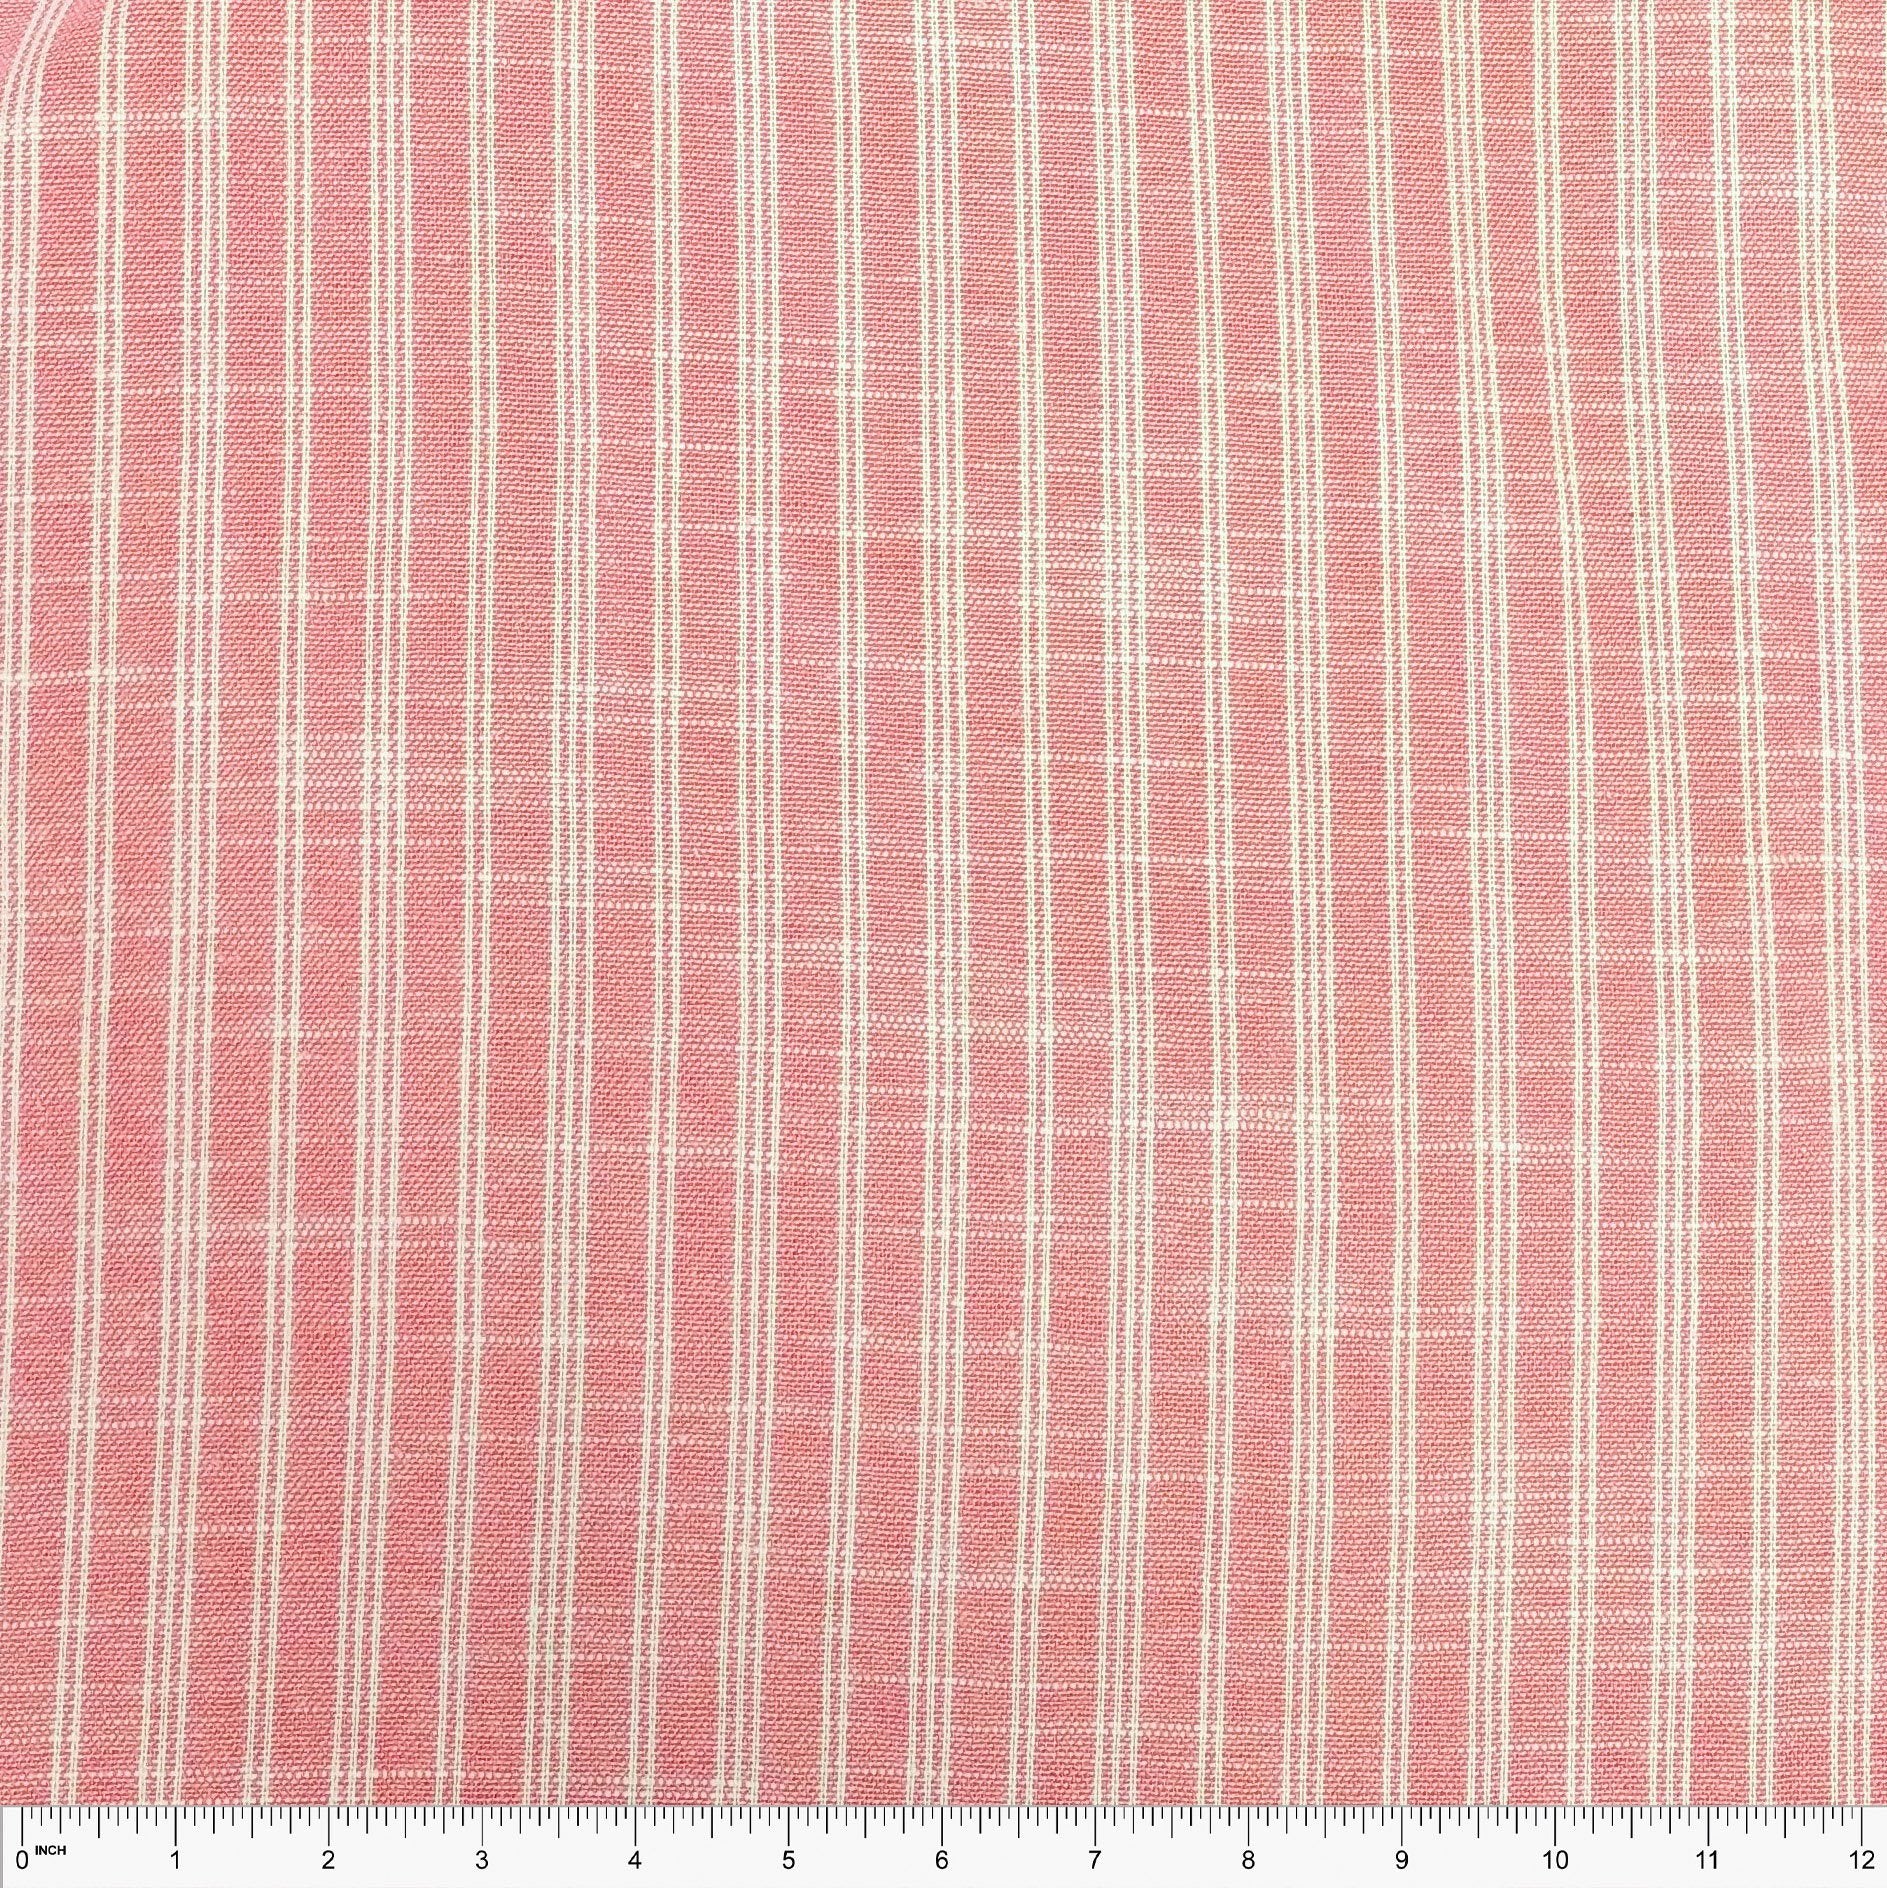 Coral and Off White Yarn Dyed Vertical Stripe Light to Medium Weight Rayon Linen Fabric, Raspberry Creek Fabrics